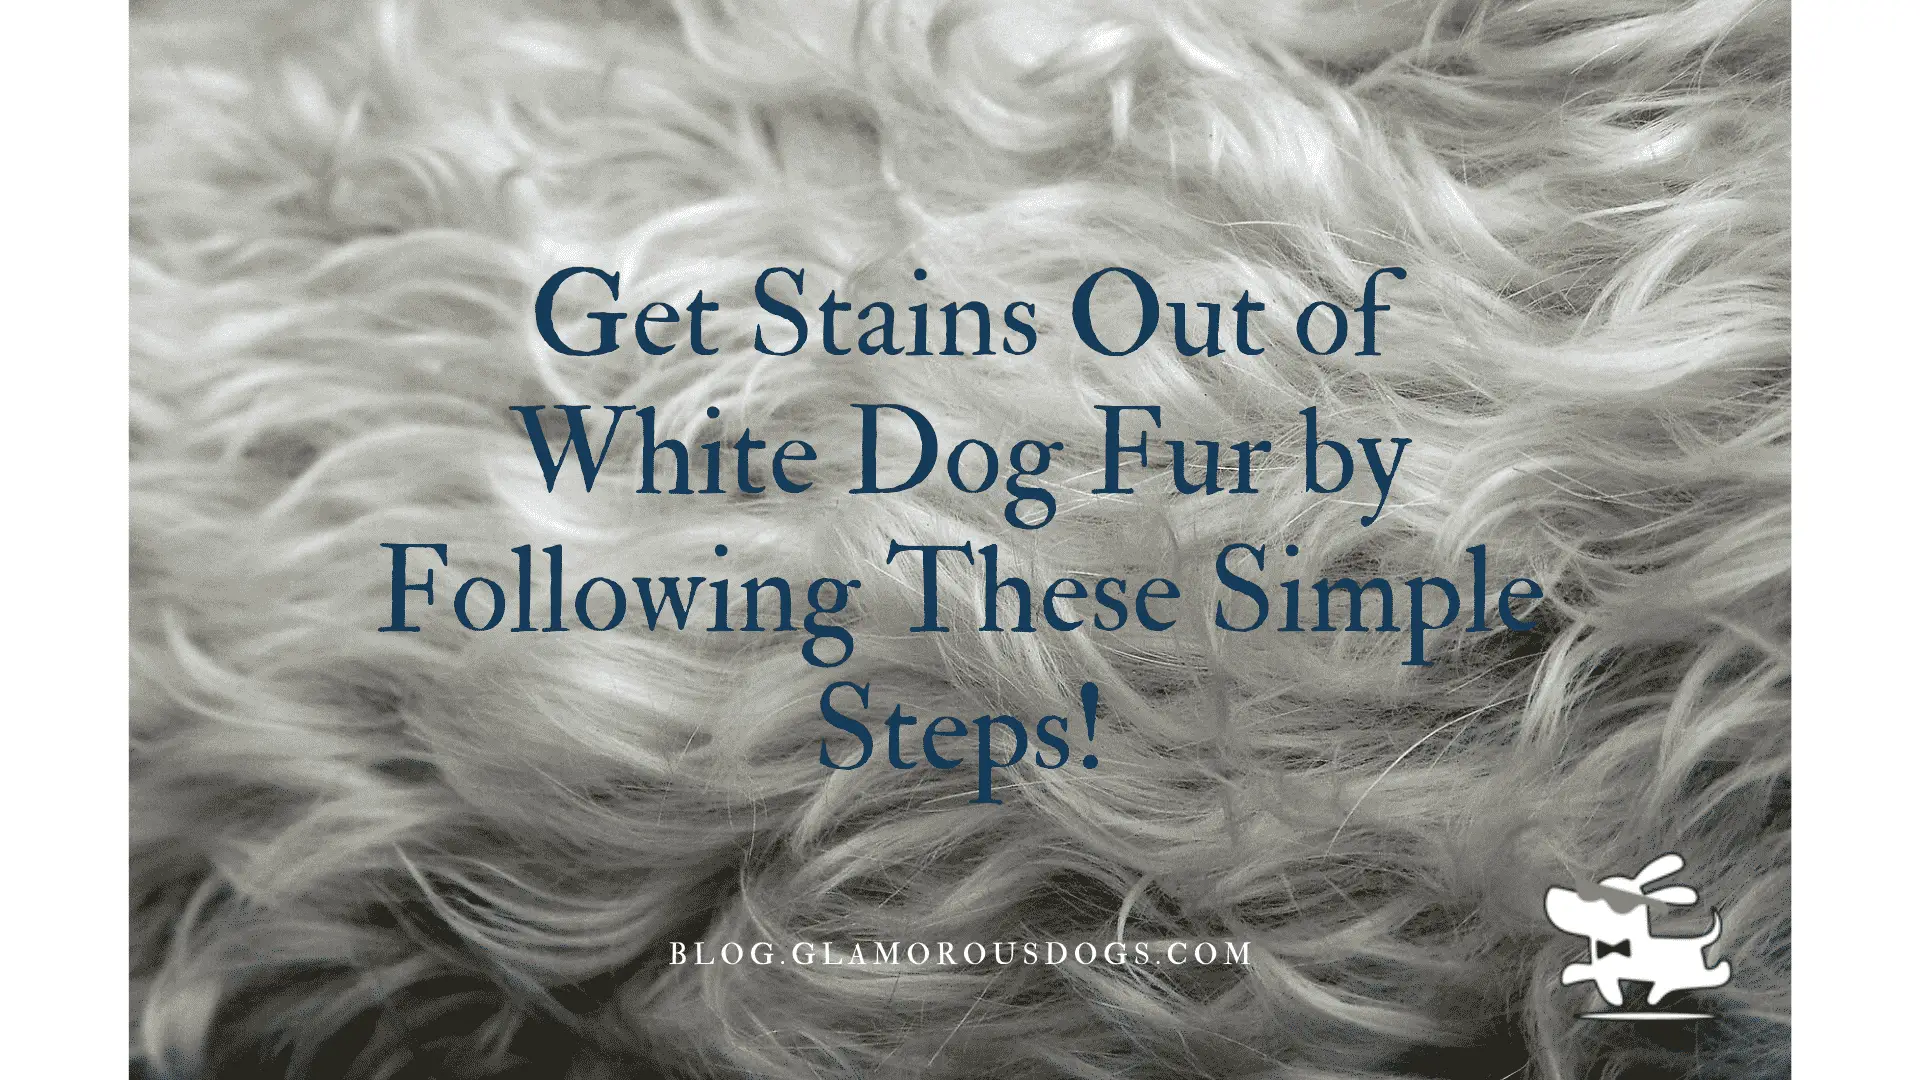 Get Stains Out of White Dog Fur by Following These Simple Steps!